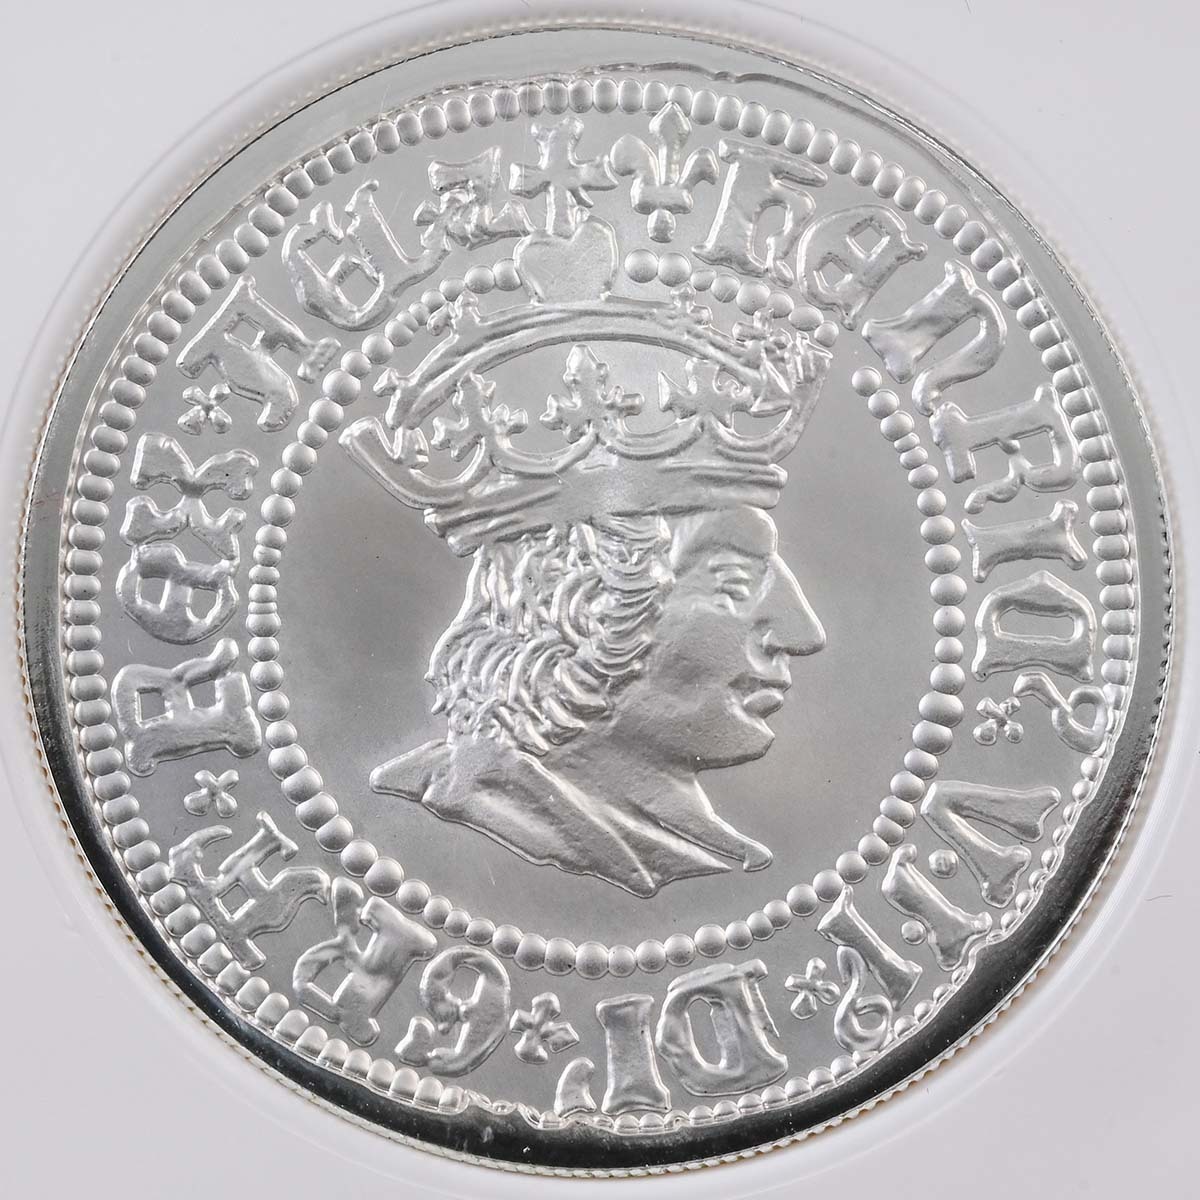 UK22H7S2O 2022 British Monarchs Henry VII 2oz Silver Proof Coin NGC Graded PF 70 Ultra Cameo First Releases Reverse